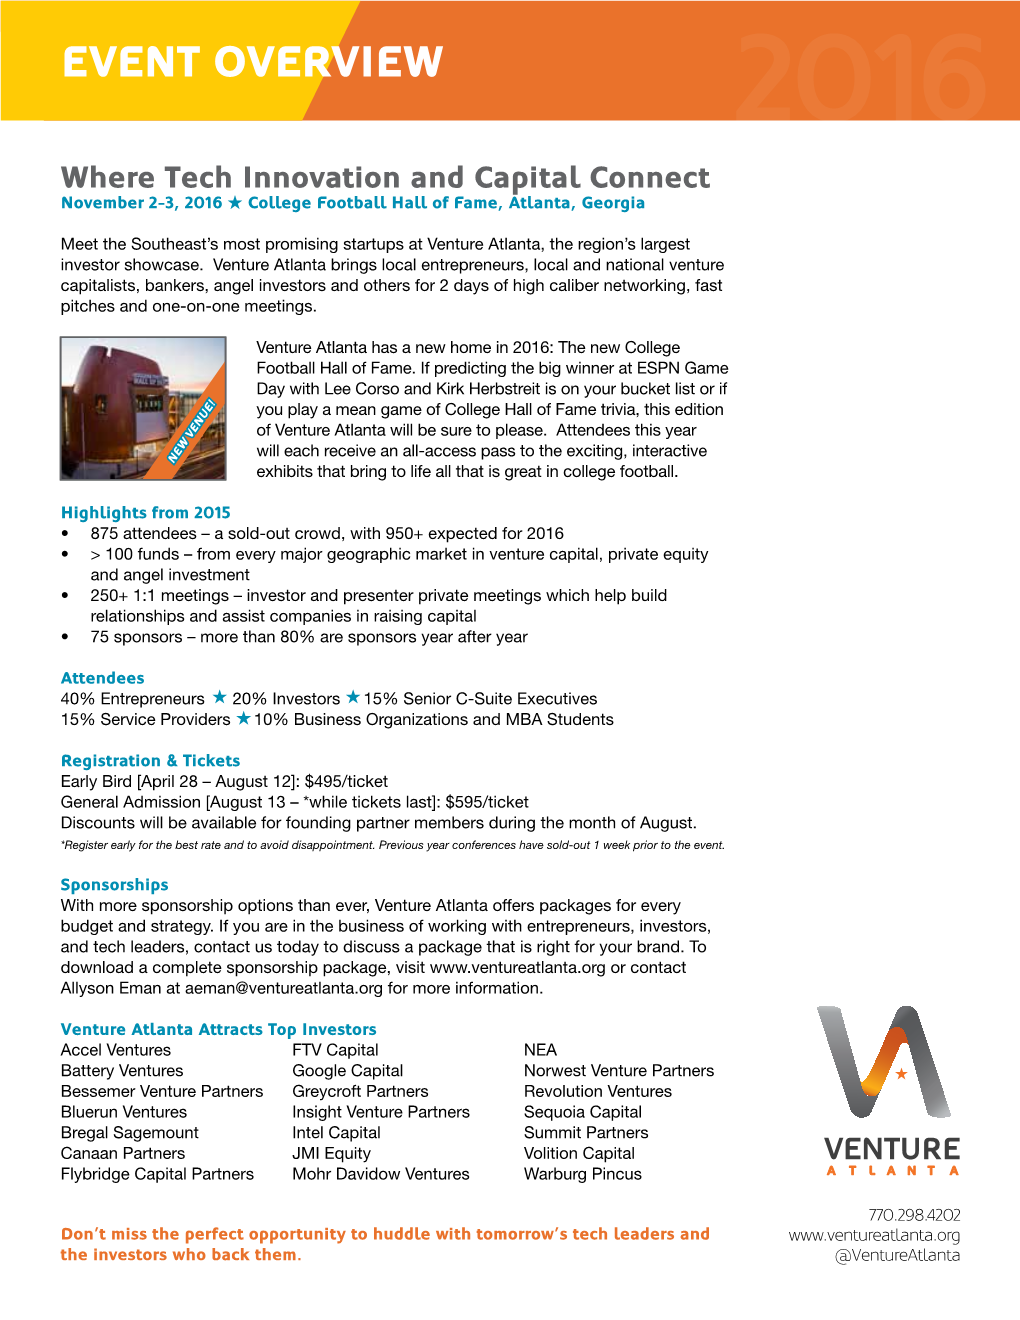 EVENT OVERVIEW 2016 Where Tech Innovation and Capital Connect November 2-3, 2016 College Football Hall of Fame, Atlanta, Georgia